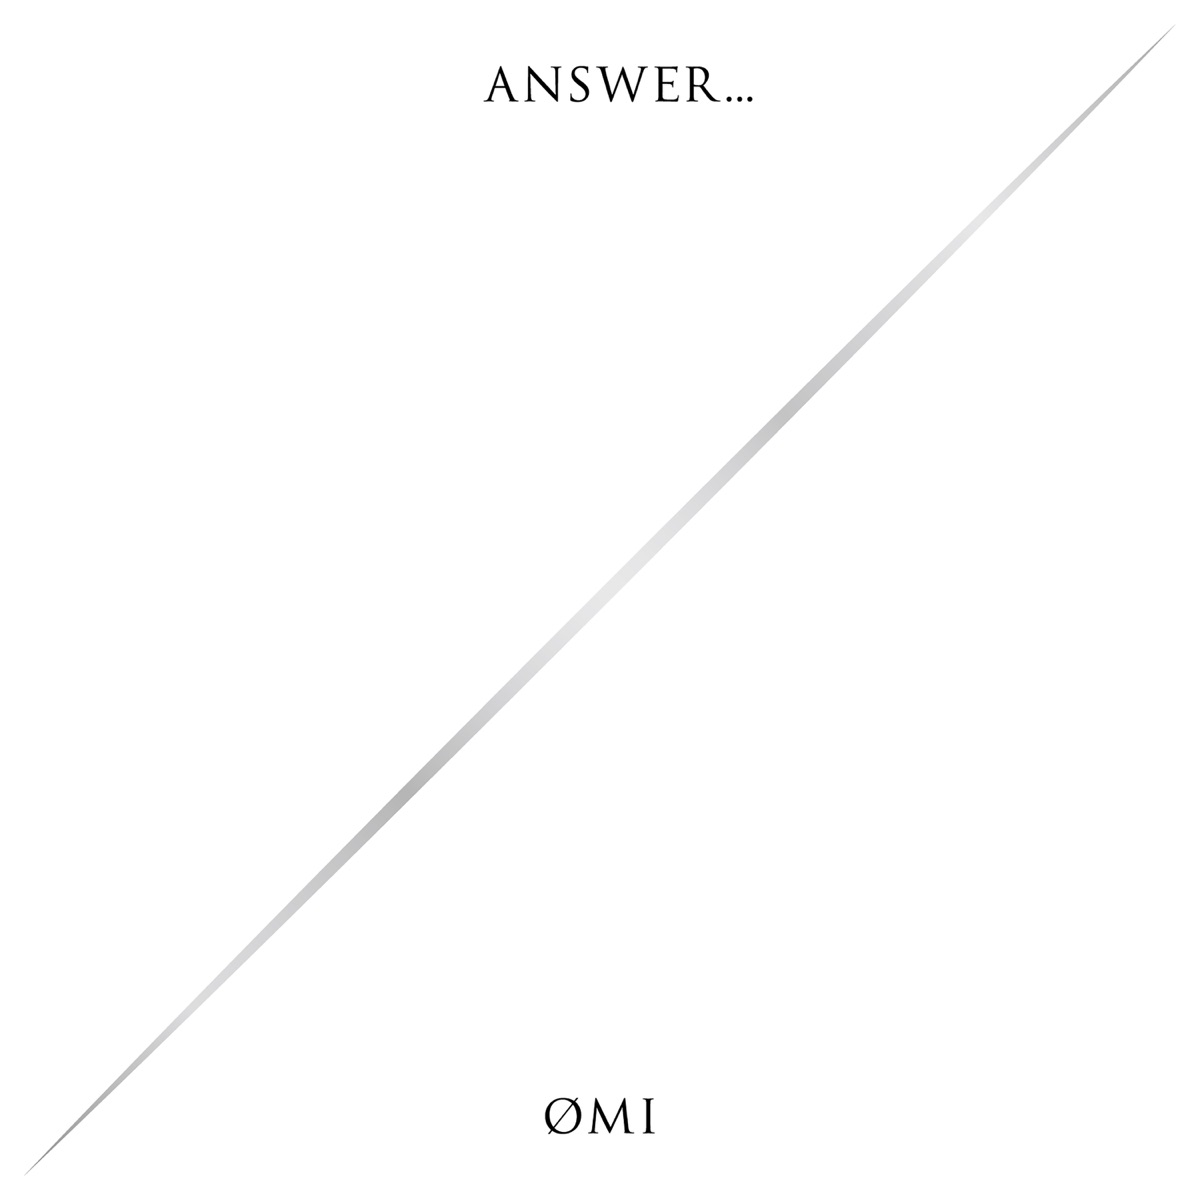 『ØMI - Just the way you are』収録の『ANSWER...』ジャケット